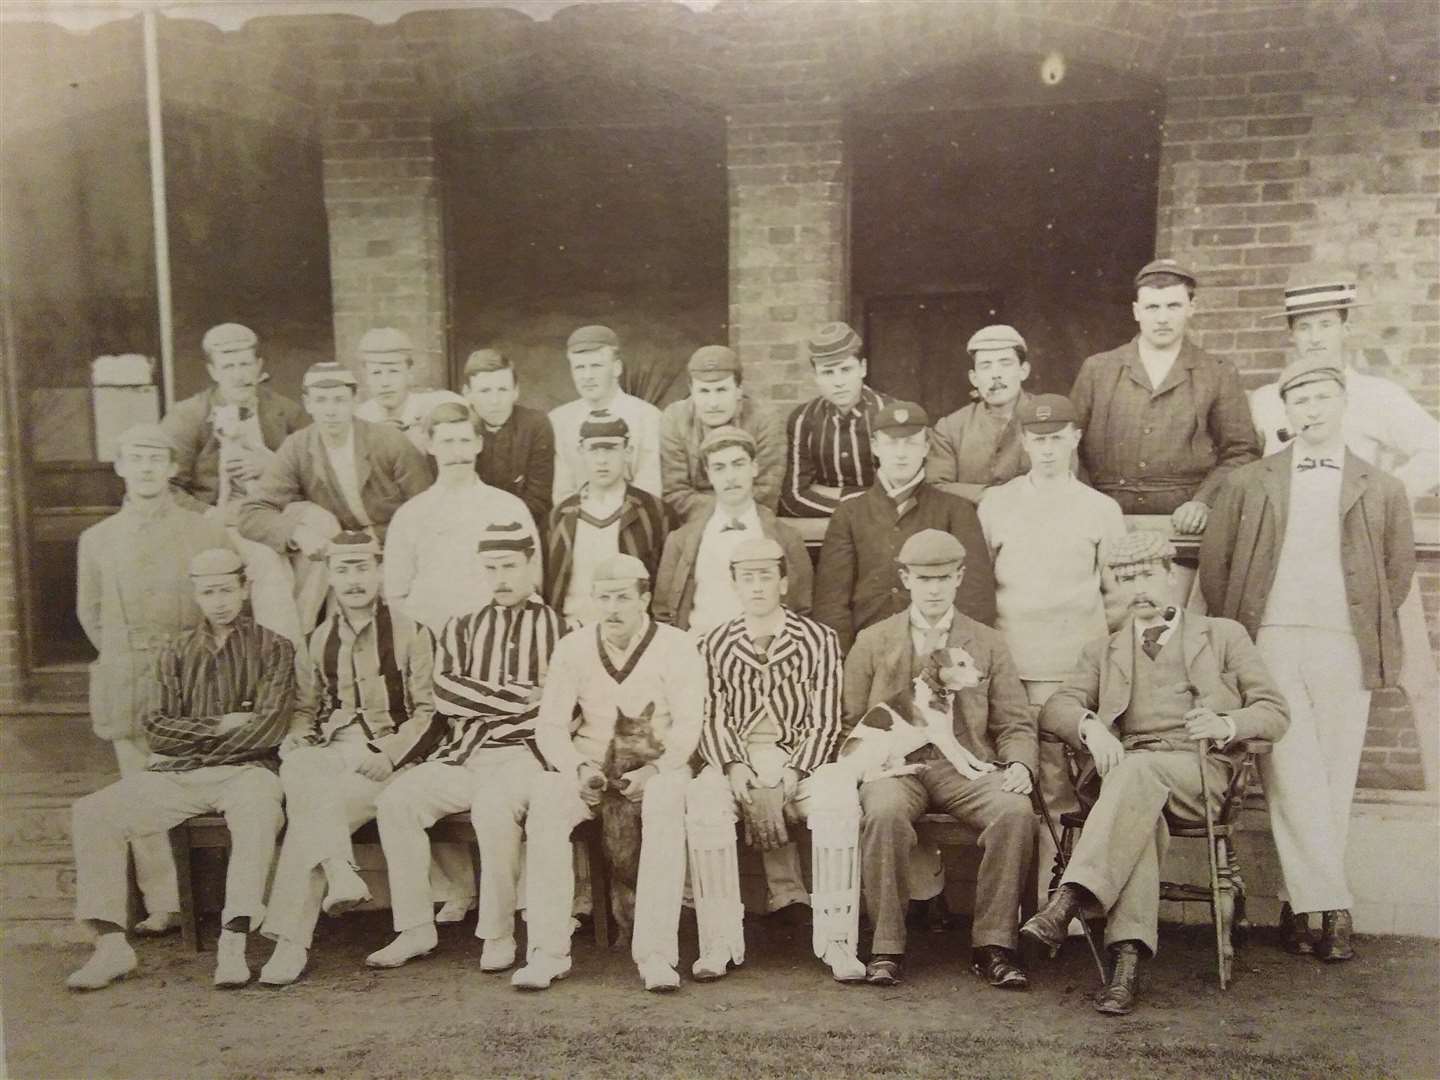 Cecil Headlam (centre bottom) played cricket for Oxford at the turn of the 20th Century. Picture: Magdalen College Archives